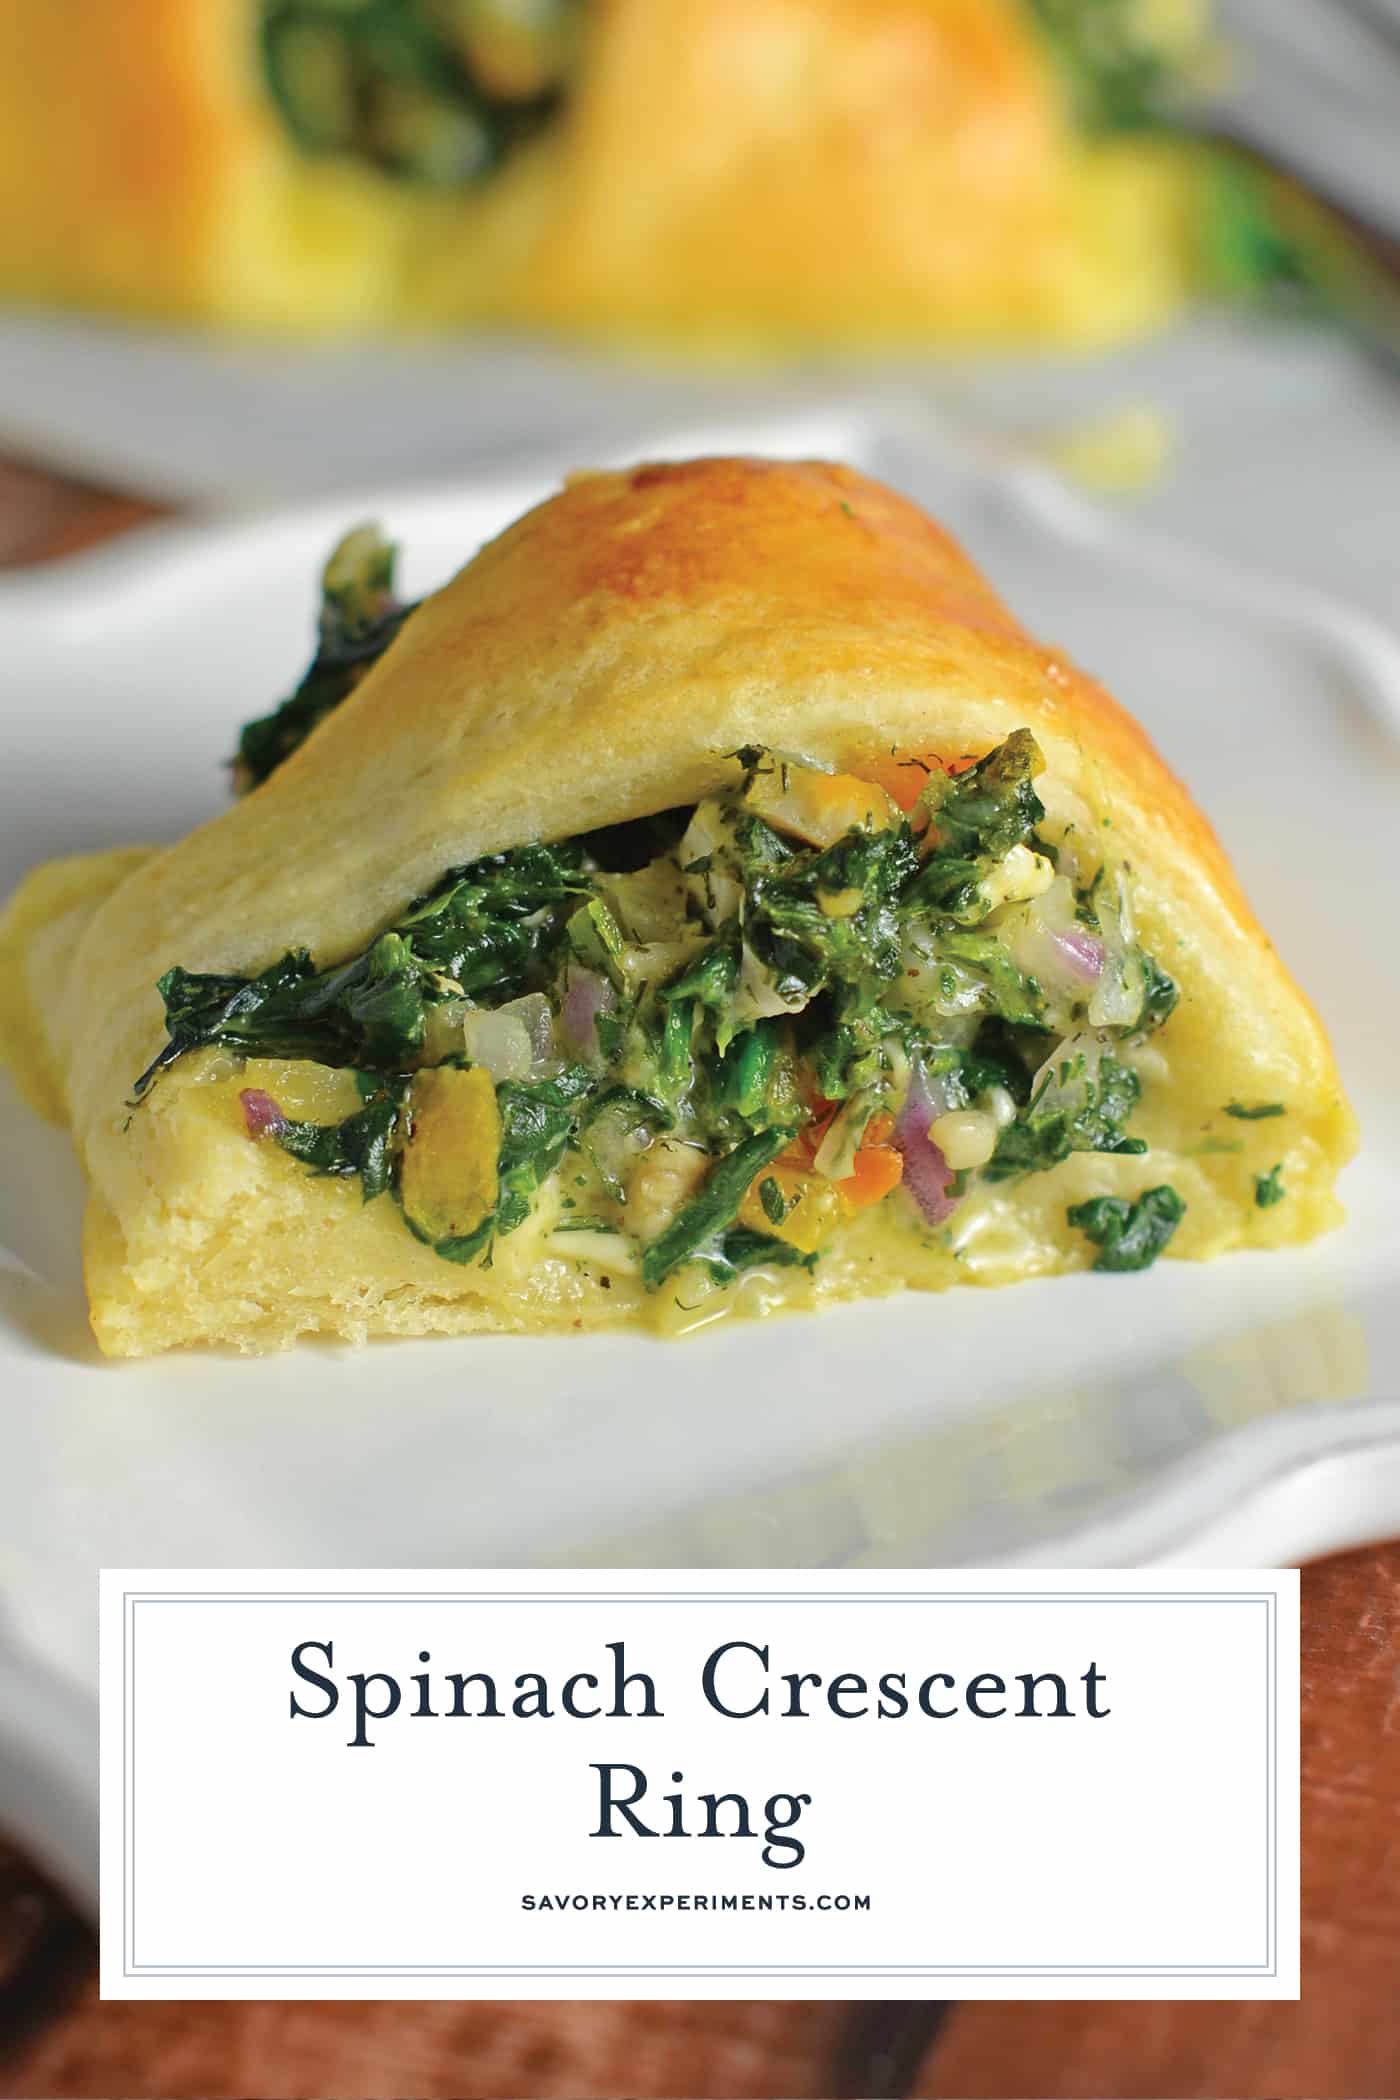 Spinach Crescent Ring is an easy brunch idea or appetizer recipe using spinach, bell pepper, onion, herbs and cheese. It is a hit at all of my parties! #crescentrollrecipes #appetizerideas #brunchrecipes www.savoryexperiments.com